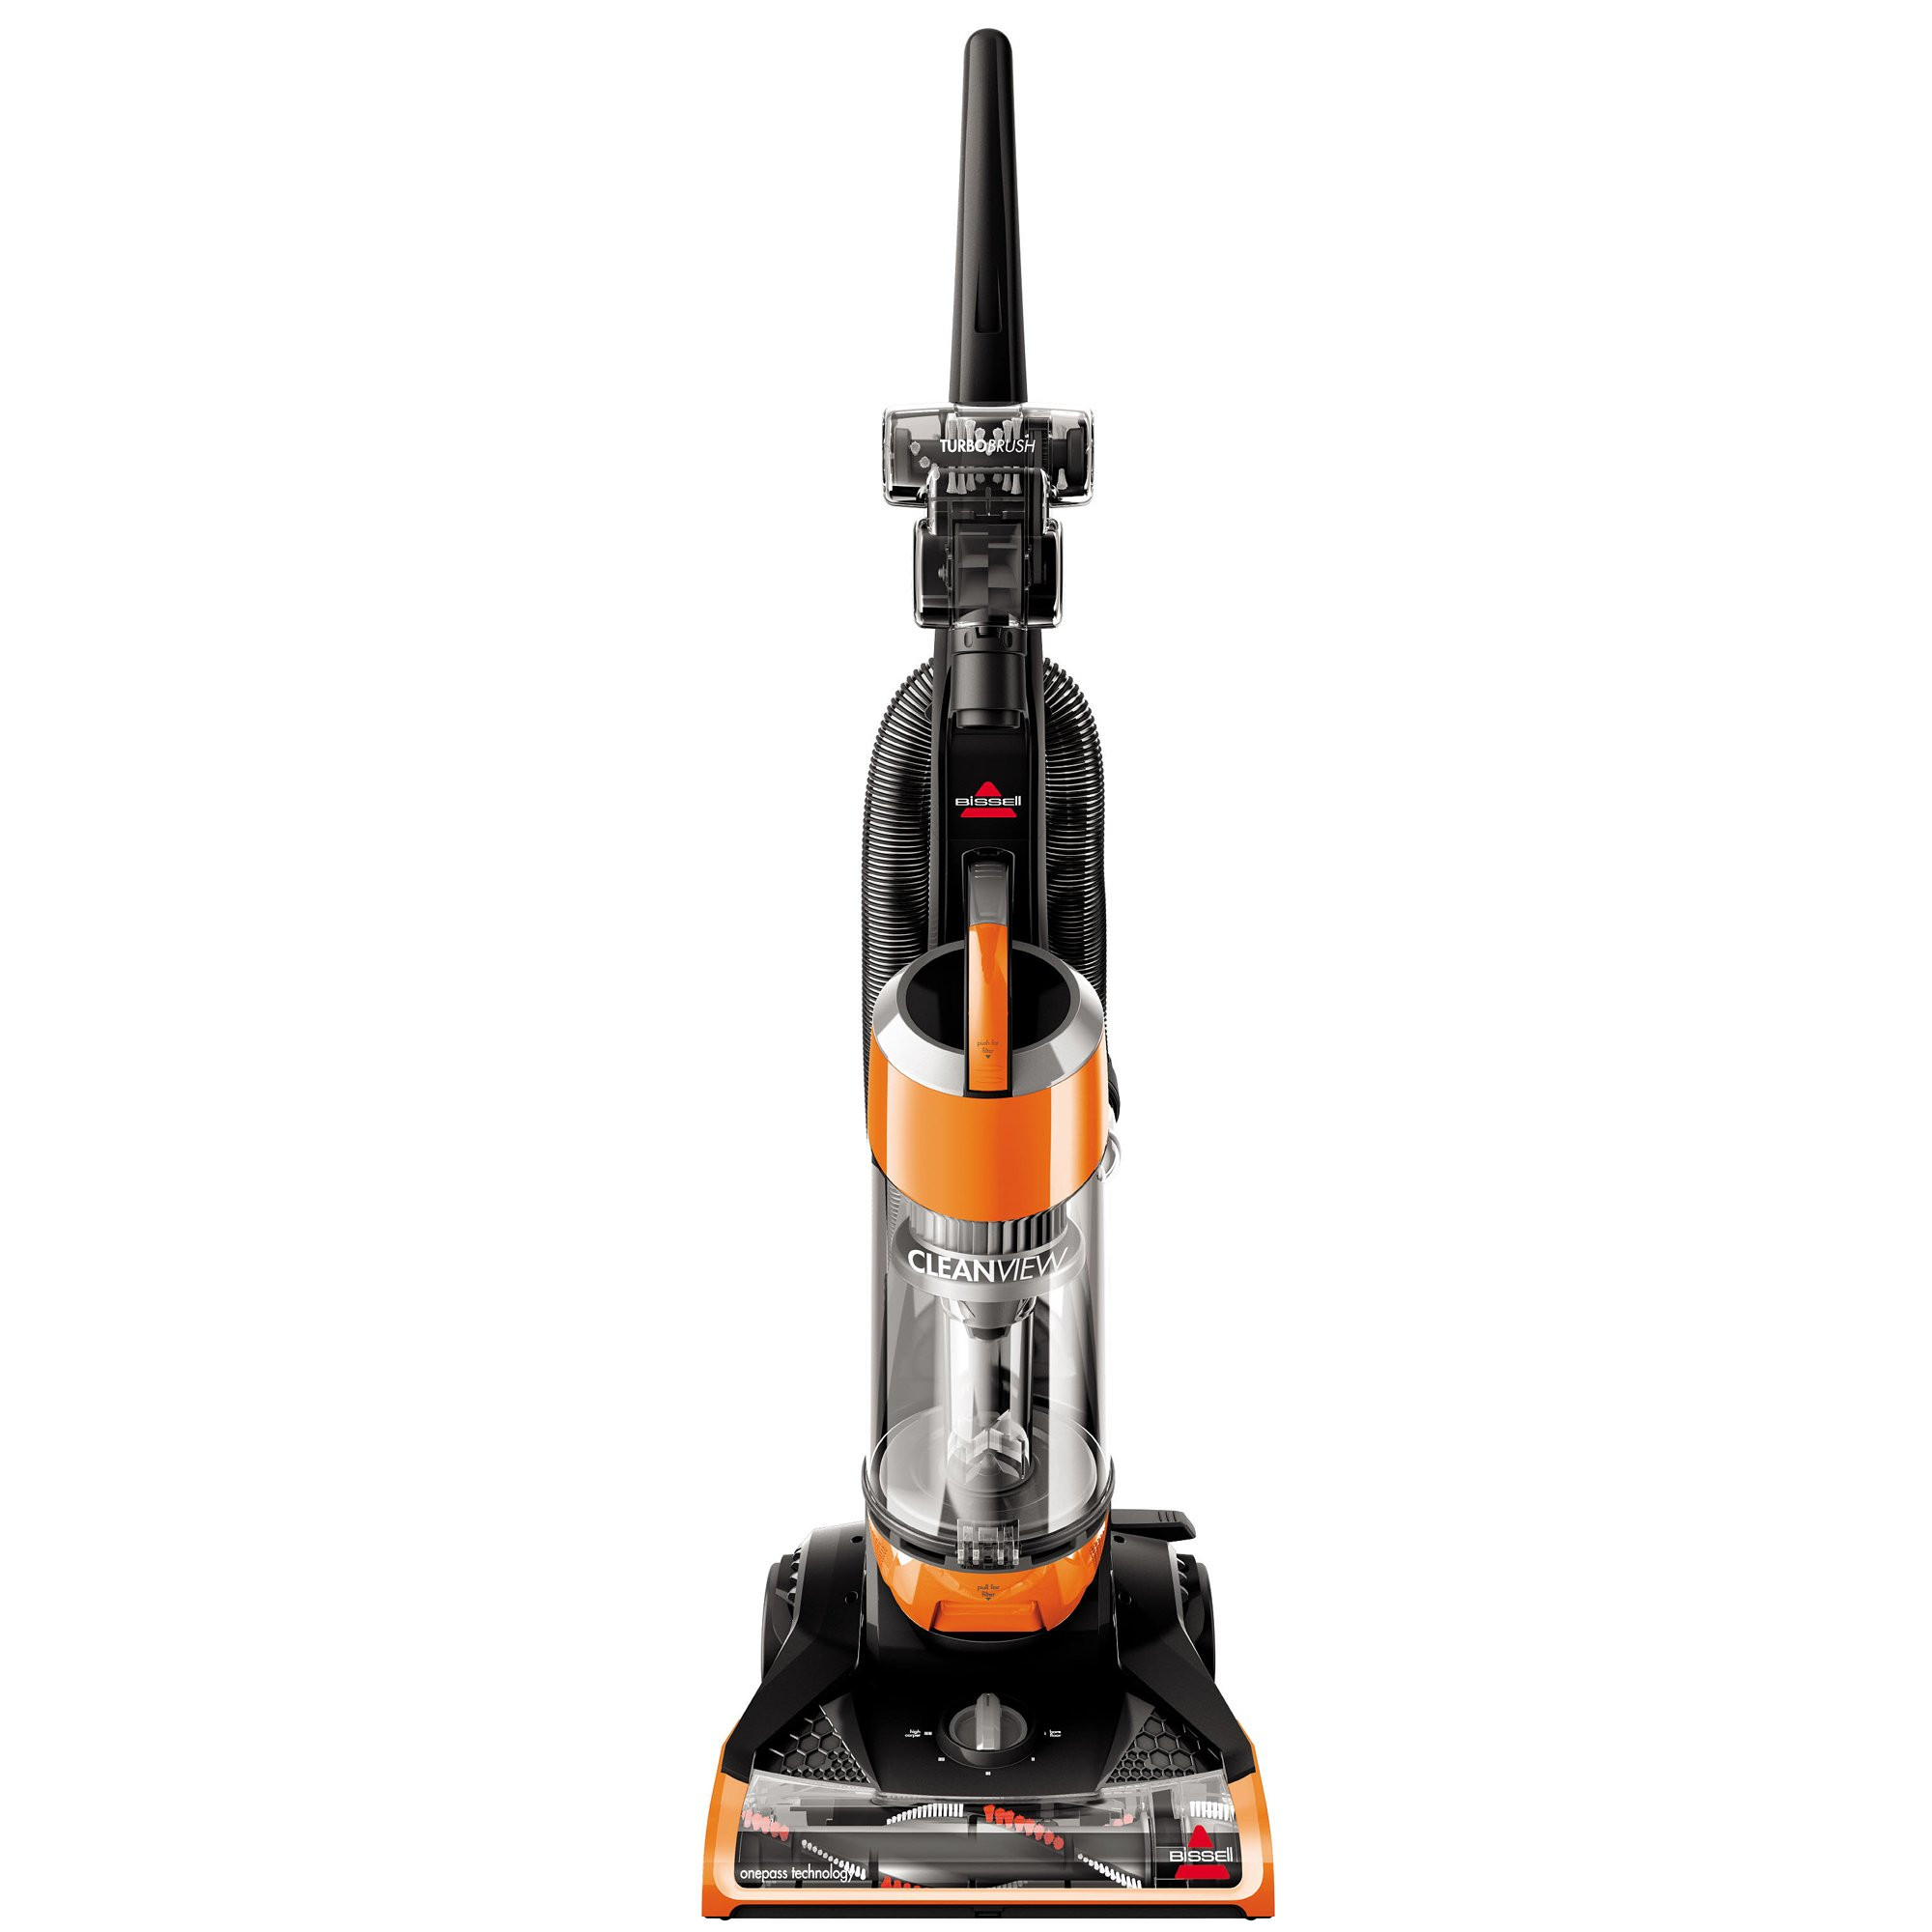 29 Great Best Vacuum for Pet Hair On Hardwood Floors and Carpet 2024 free download best vacuum for pet hair on hardwood floors and carpet of best vacuum cleaners for home amazon com pertaining to bissell cleanview upright bagless vacuum cleaner with onepass technology 1831